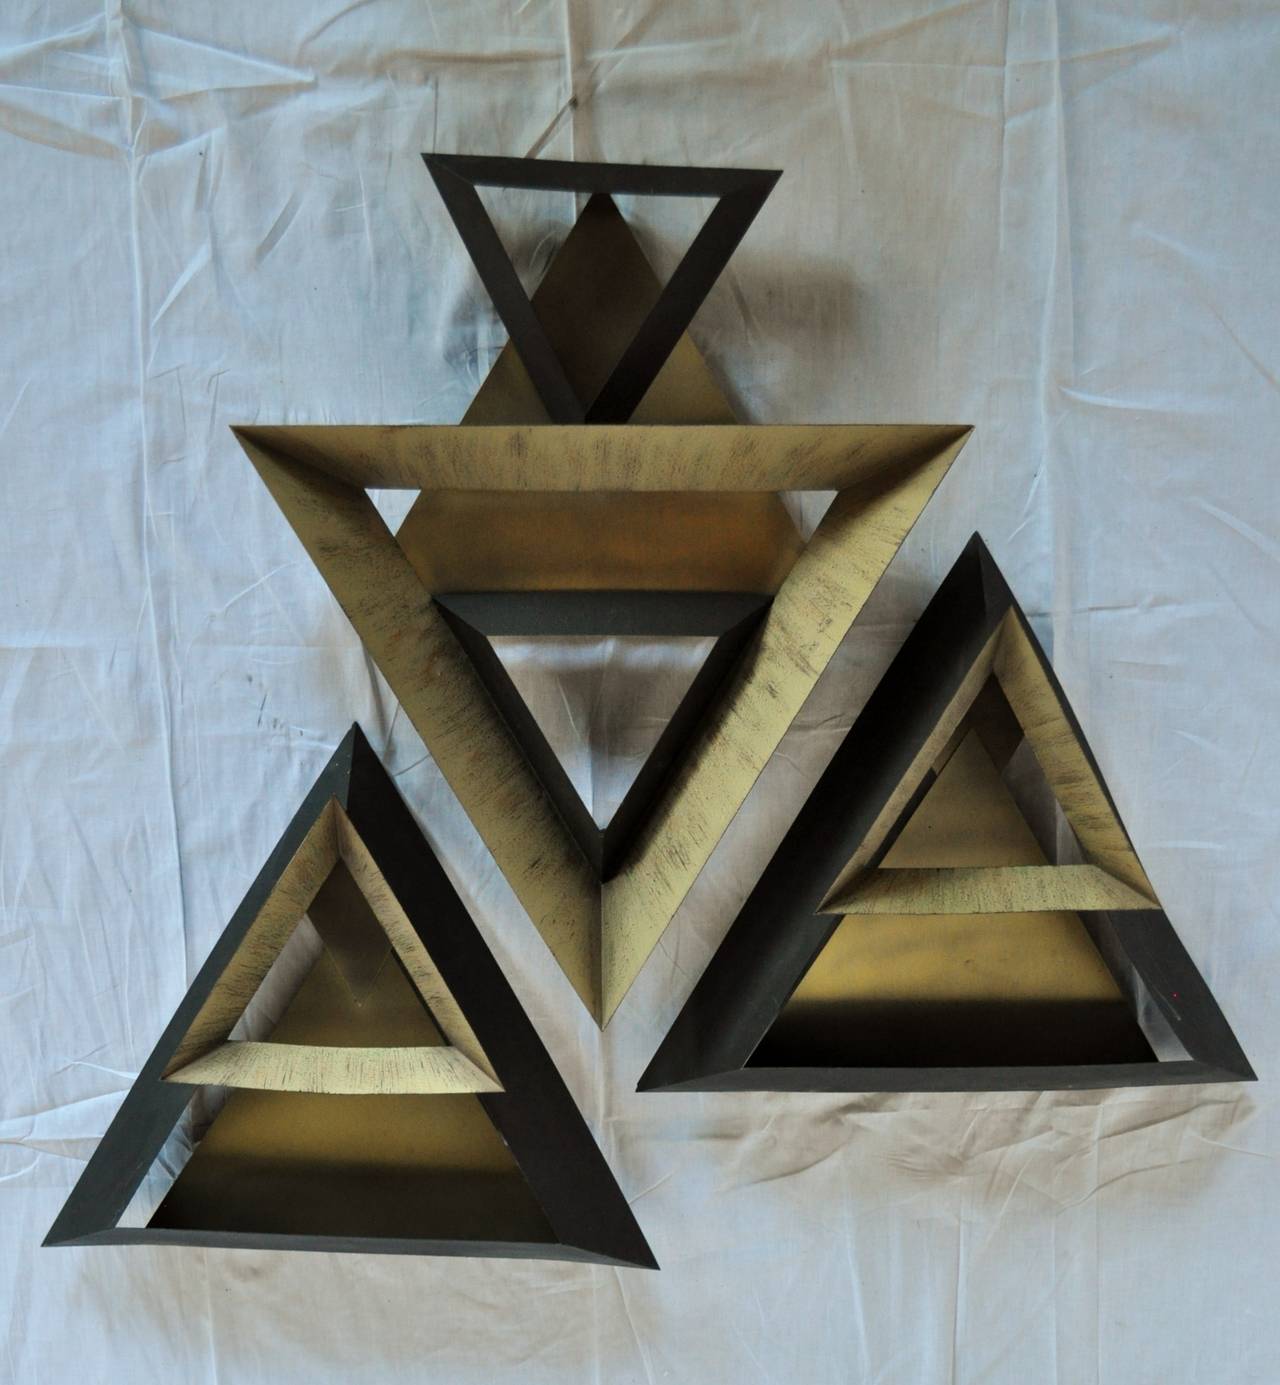 Three-piece triangular wall sculpture set designed by Curtis Jere for Artisan House. Welded and painted mixed metal wall art in original black and gold tones. Welded eye hooks on back of pieces for hanging in multiple configurations.
Signed and